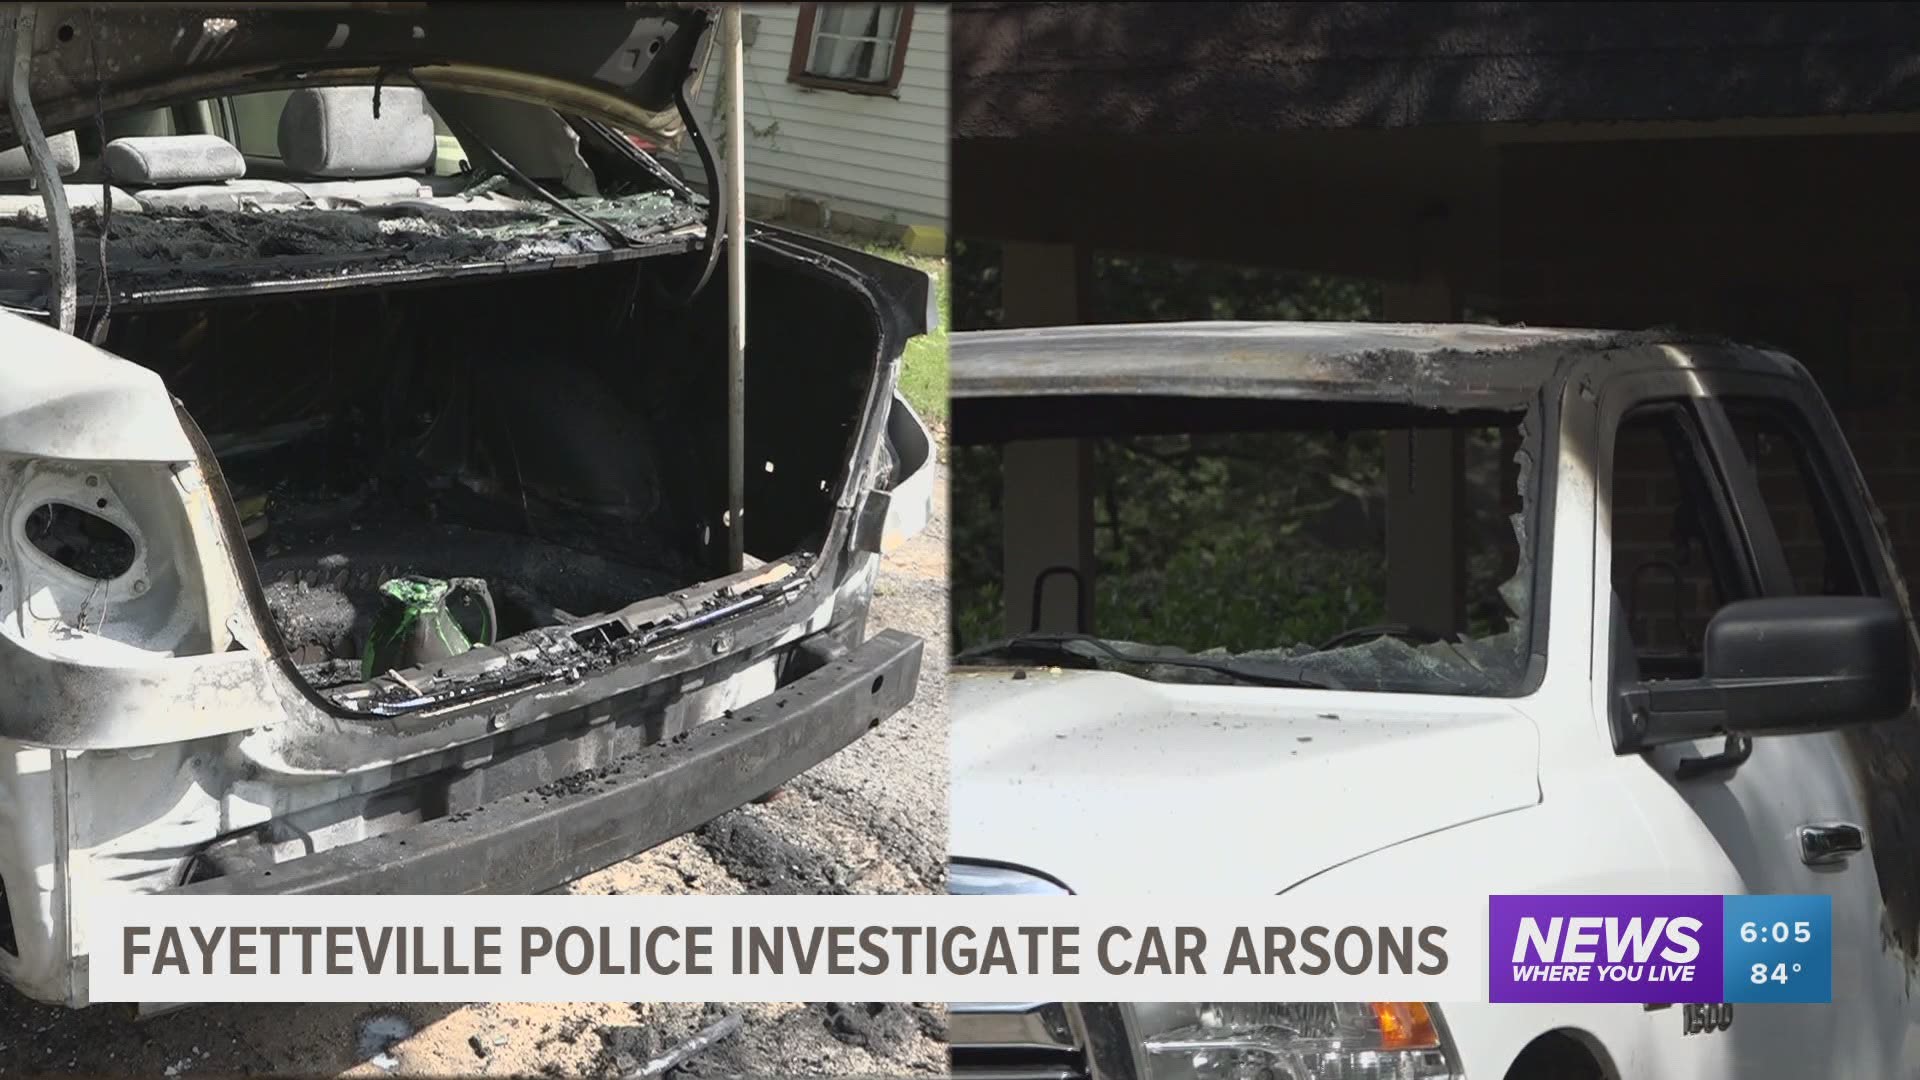 Six vehicles were torched at a Fayetteville apartment complex Tuesday morning. https://bit.ly/2FCcoF5